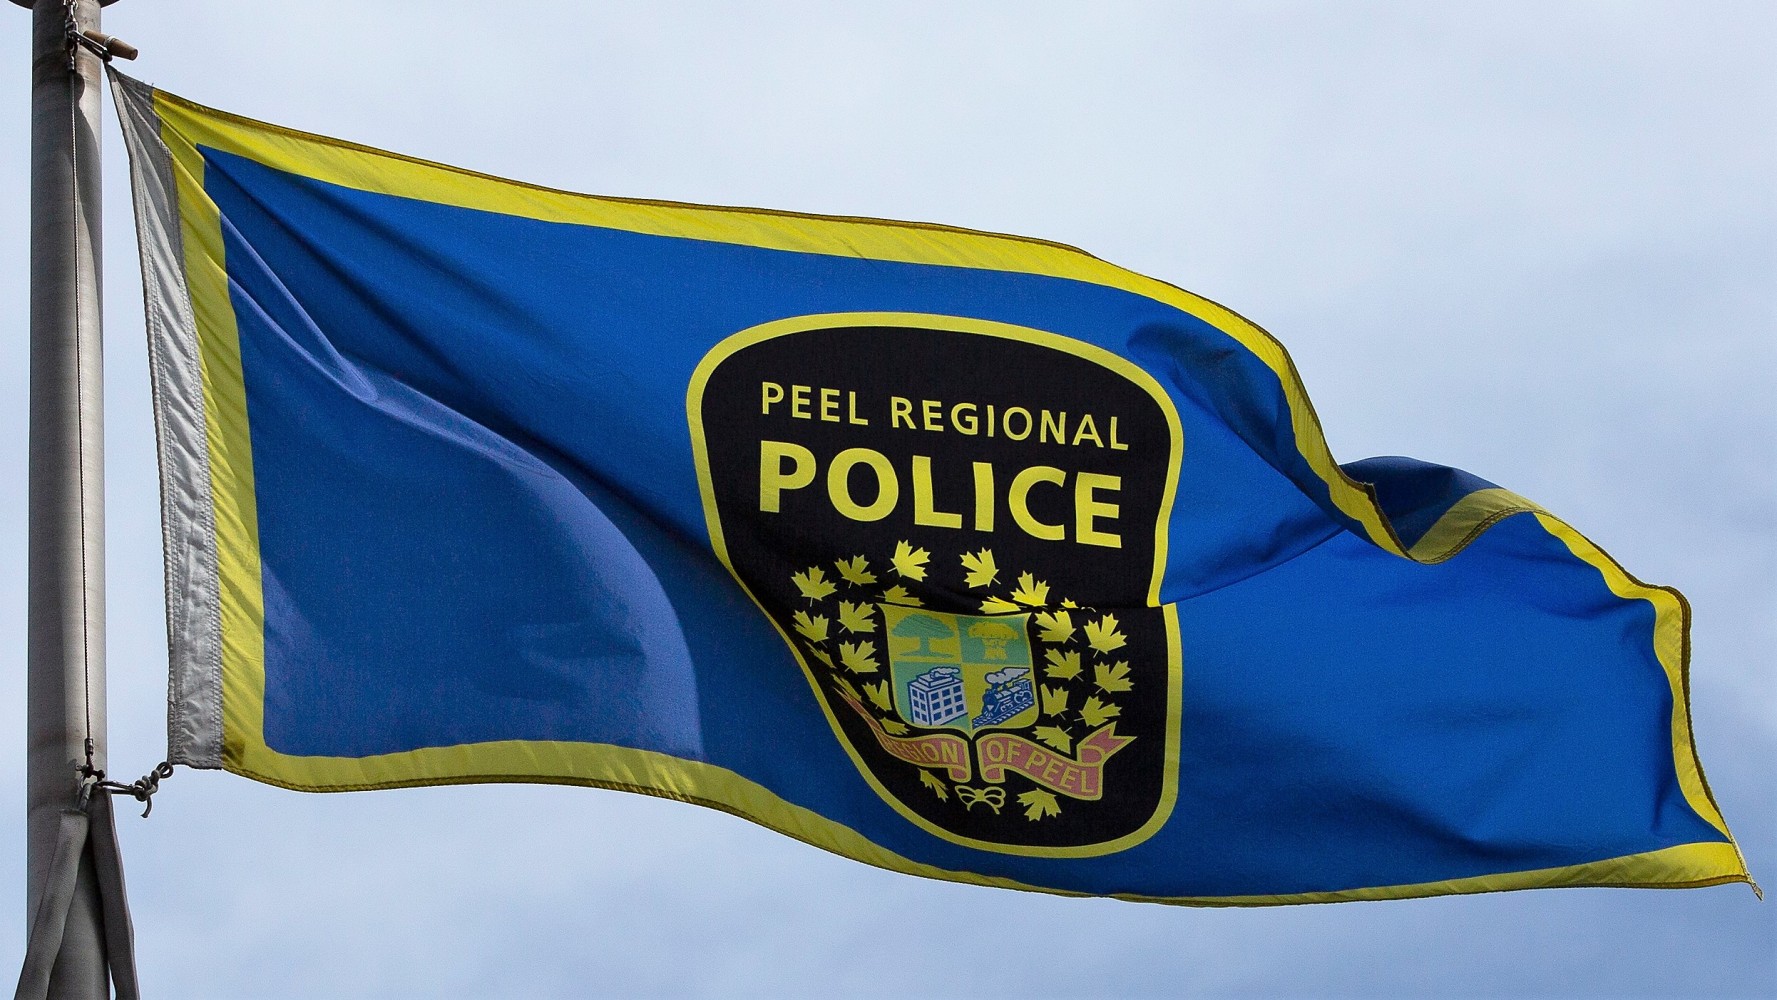 Part 2: Is anyone policing Peel police?